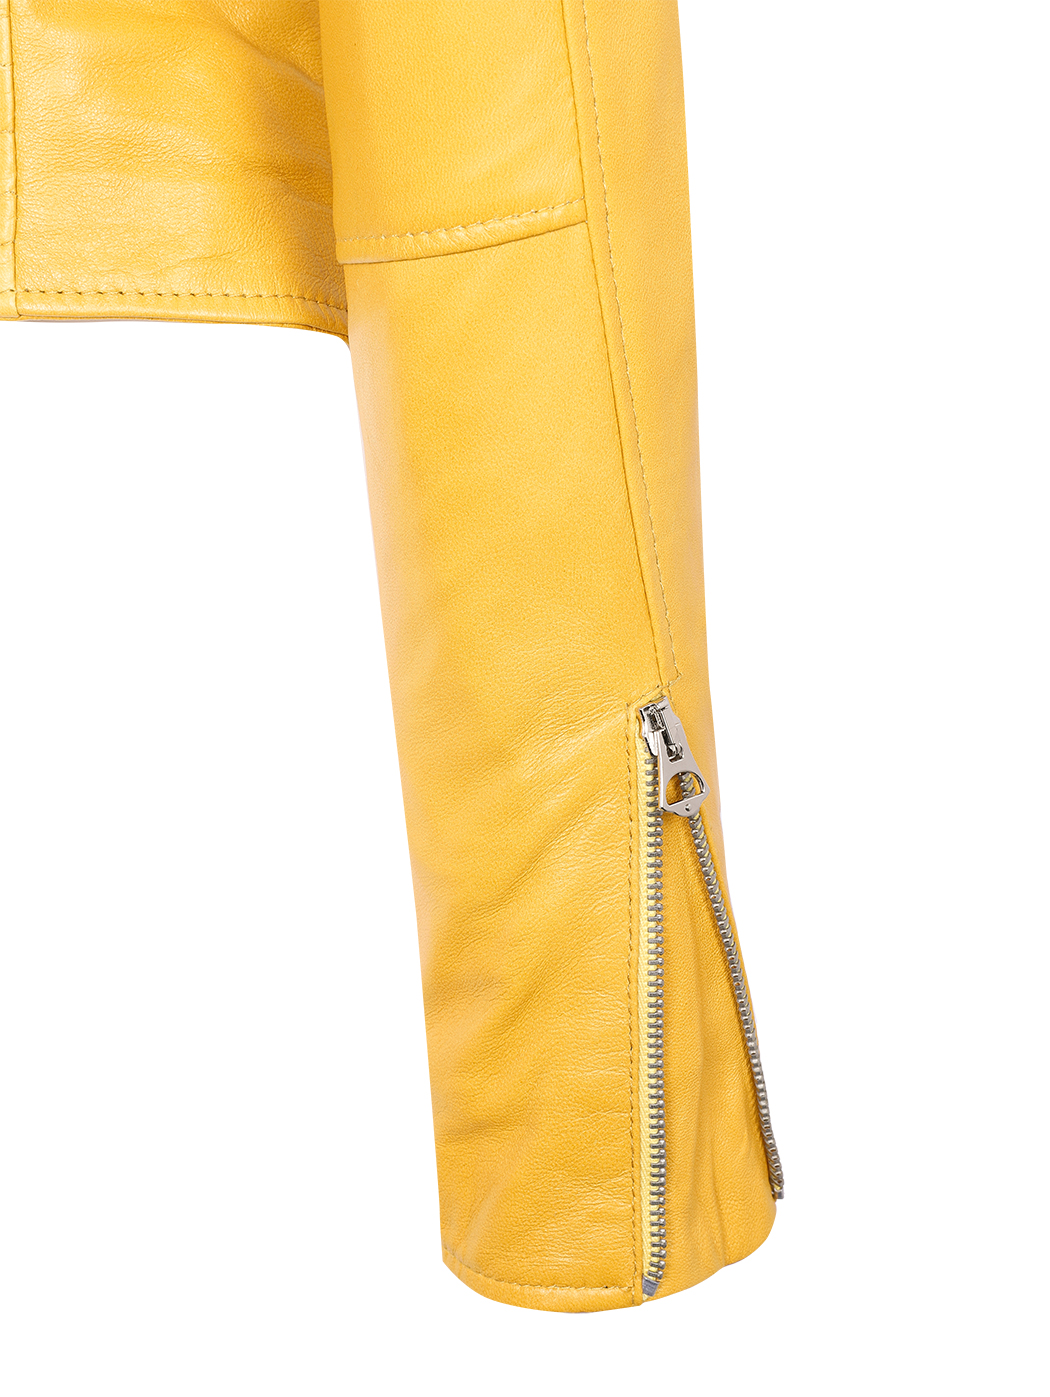 Yellow leather biker jacket with belt 